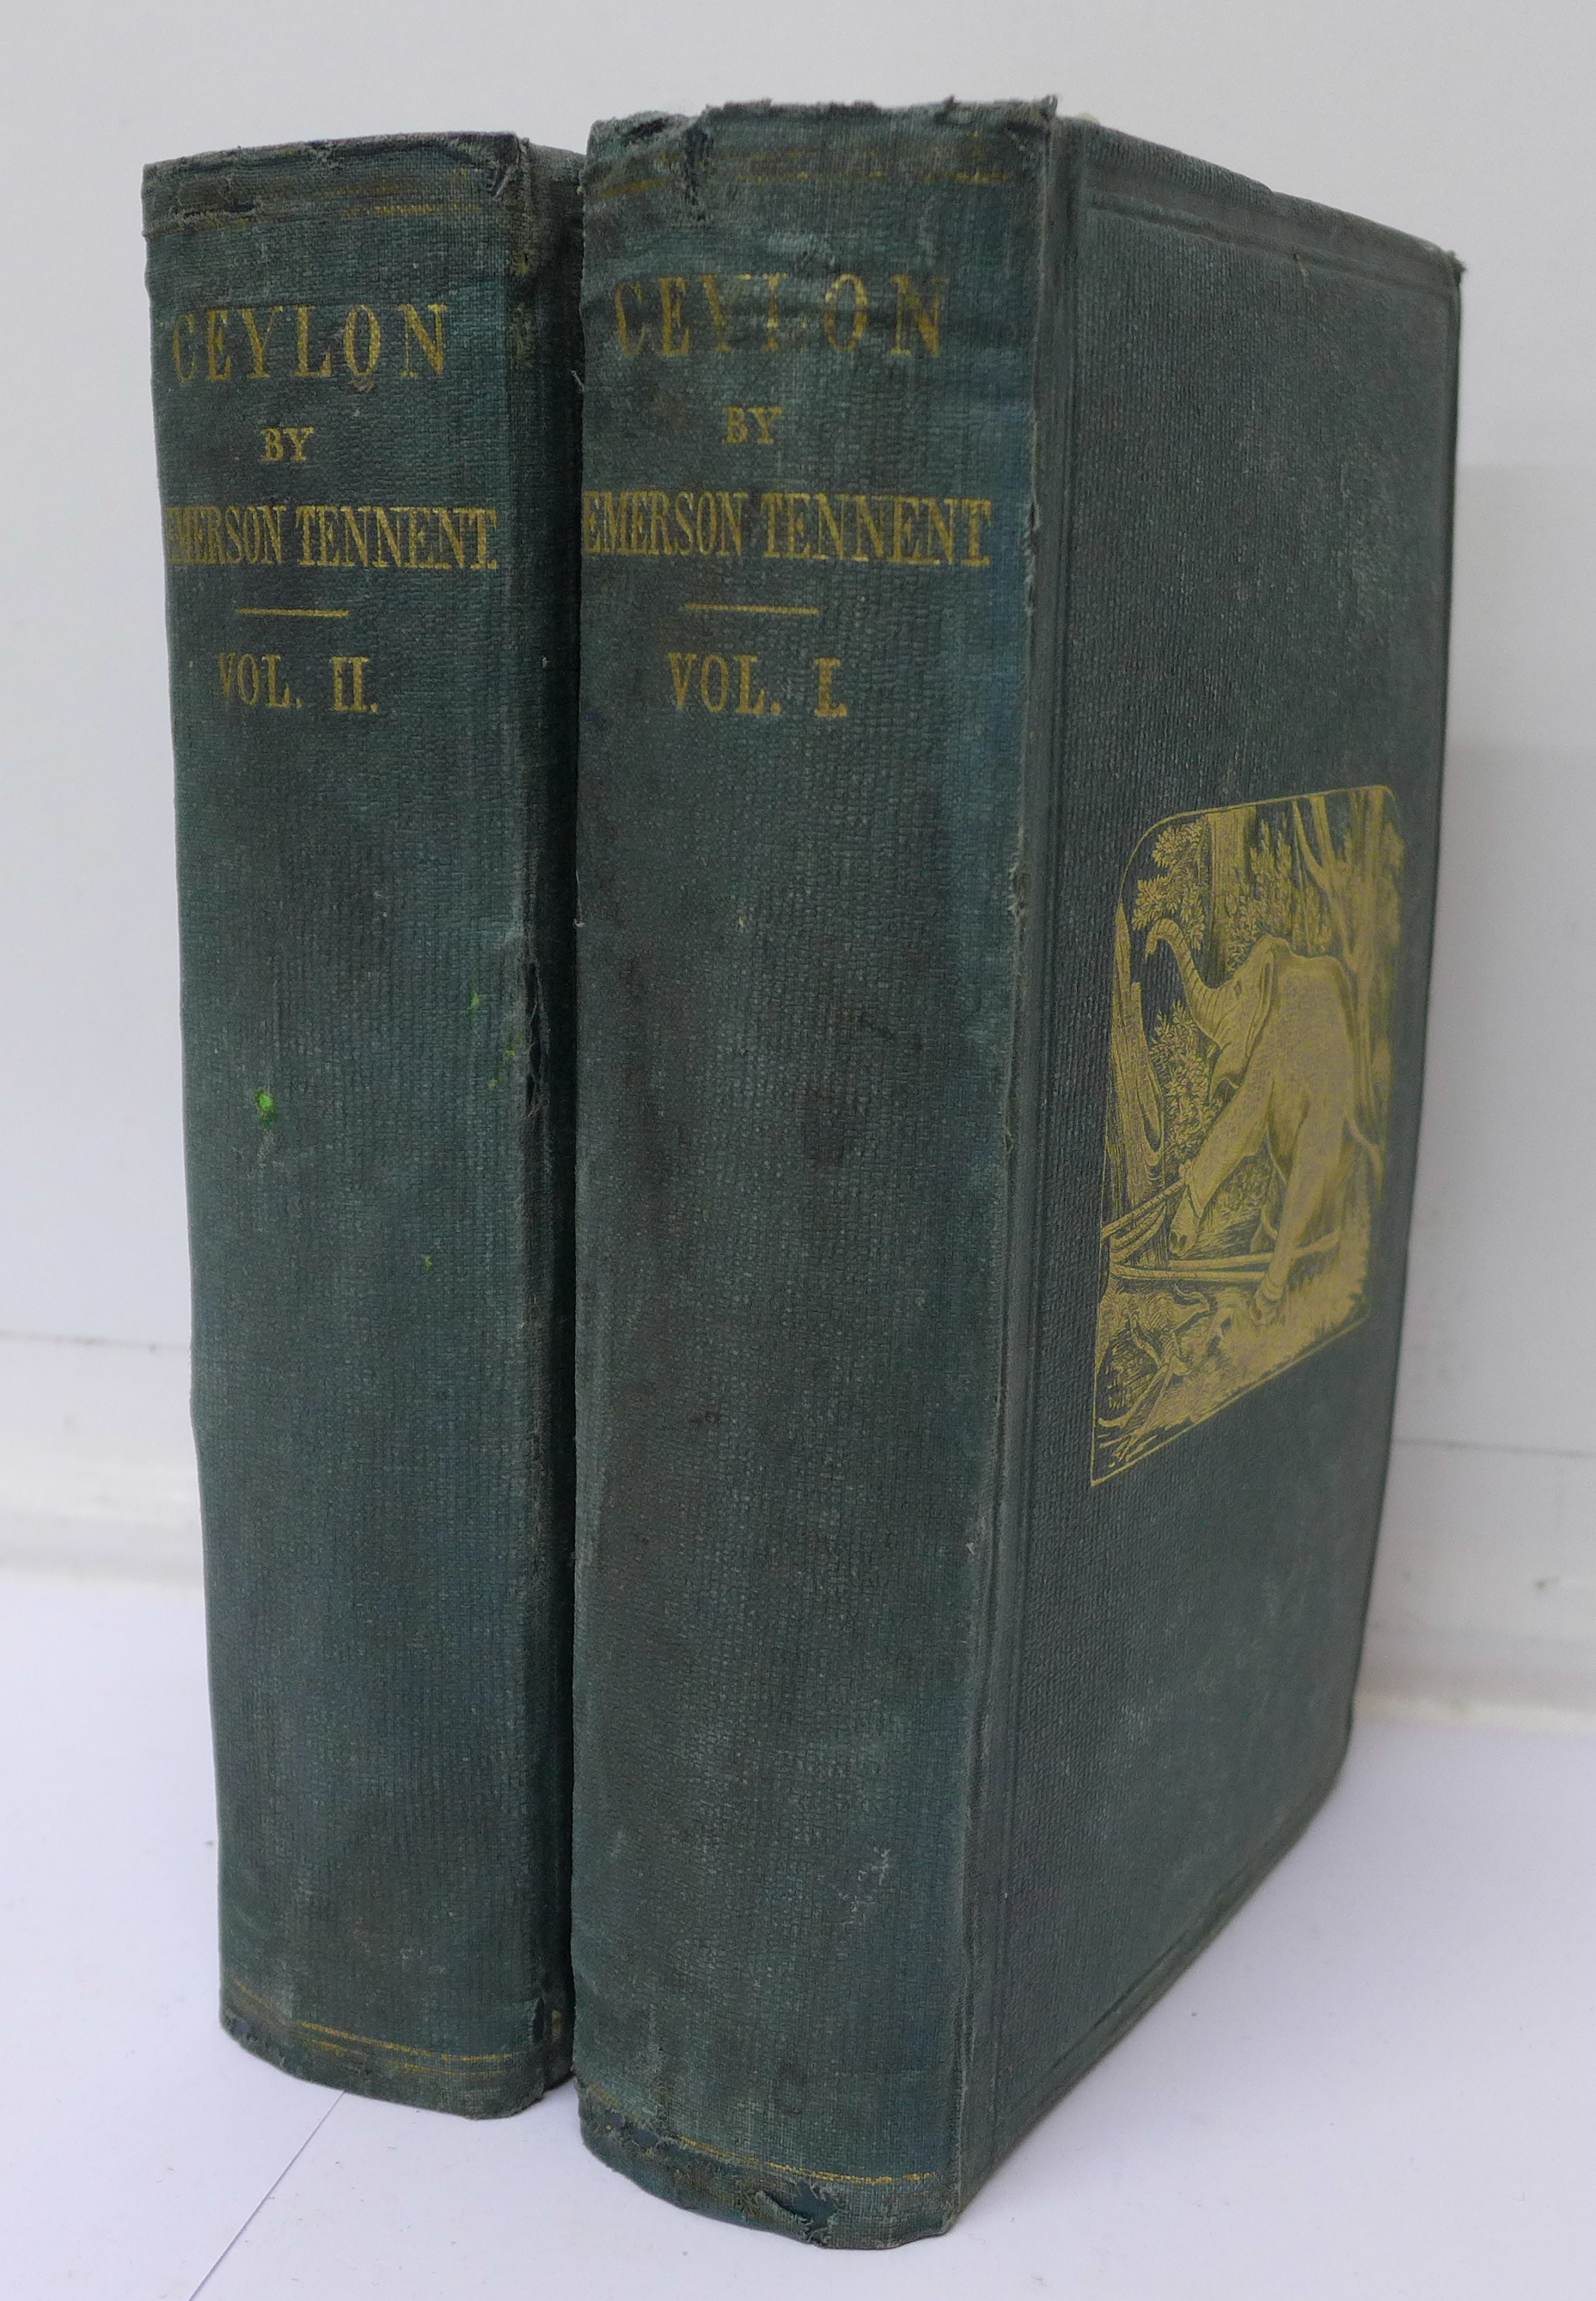 Two volumes, Ceylon by Emerson Tennent, 1860, published by Longman, Green,